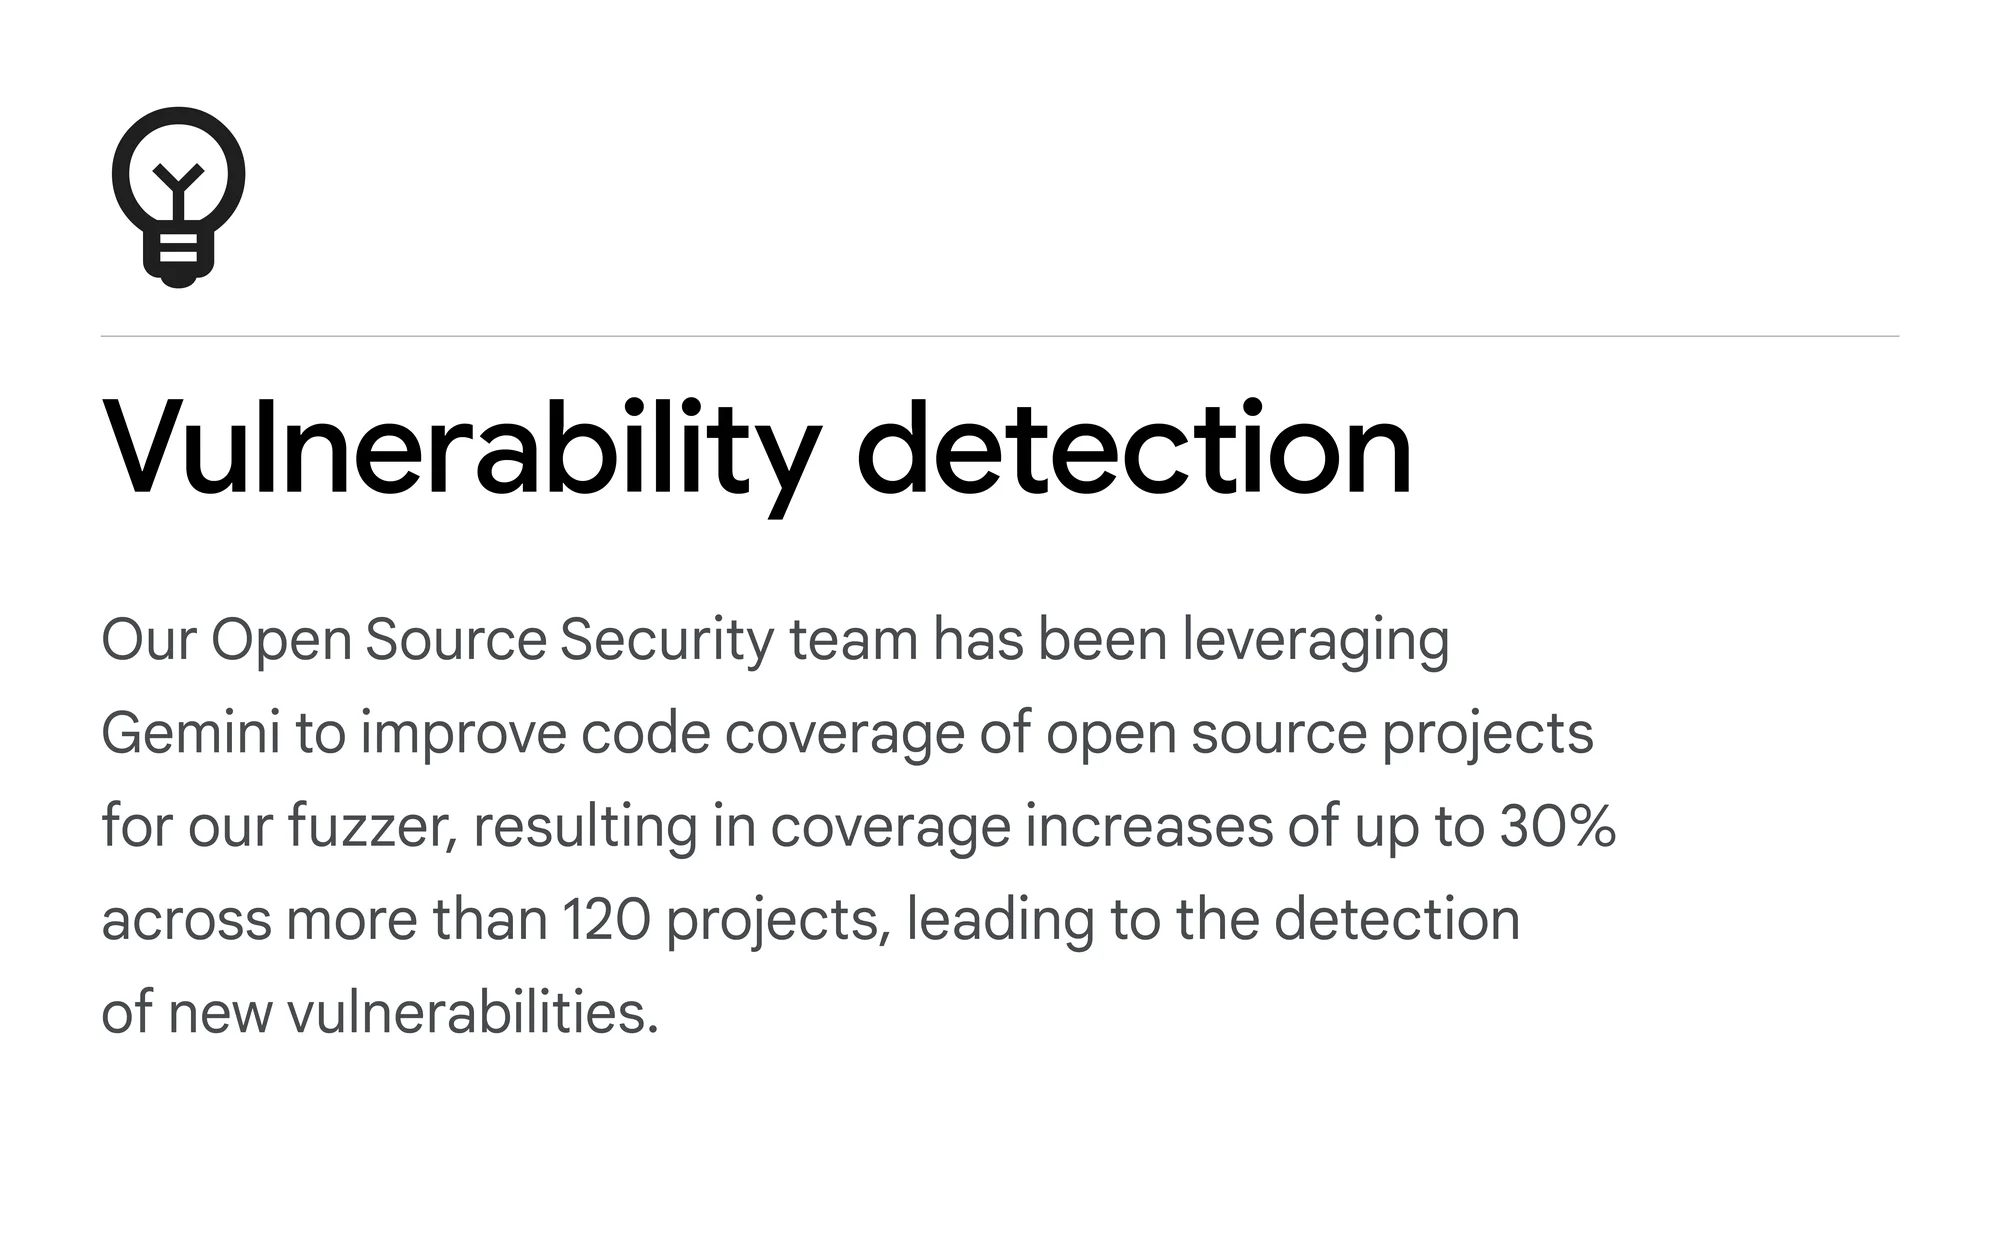 A text card that reads: Vulnerability detection: Our Open Source Security team has been leveraging Gemini to improve code coverage of open source projects for our fuzzer, resulting in coverage increases of up to 30% across more than 120 projects, leading to the detection of new vulnerabilities.